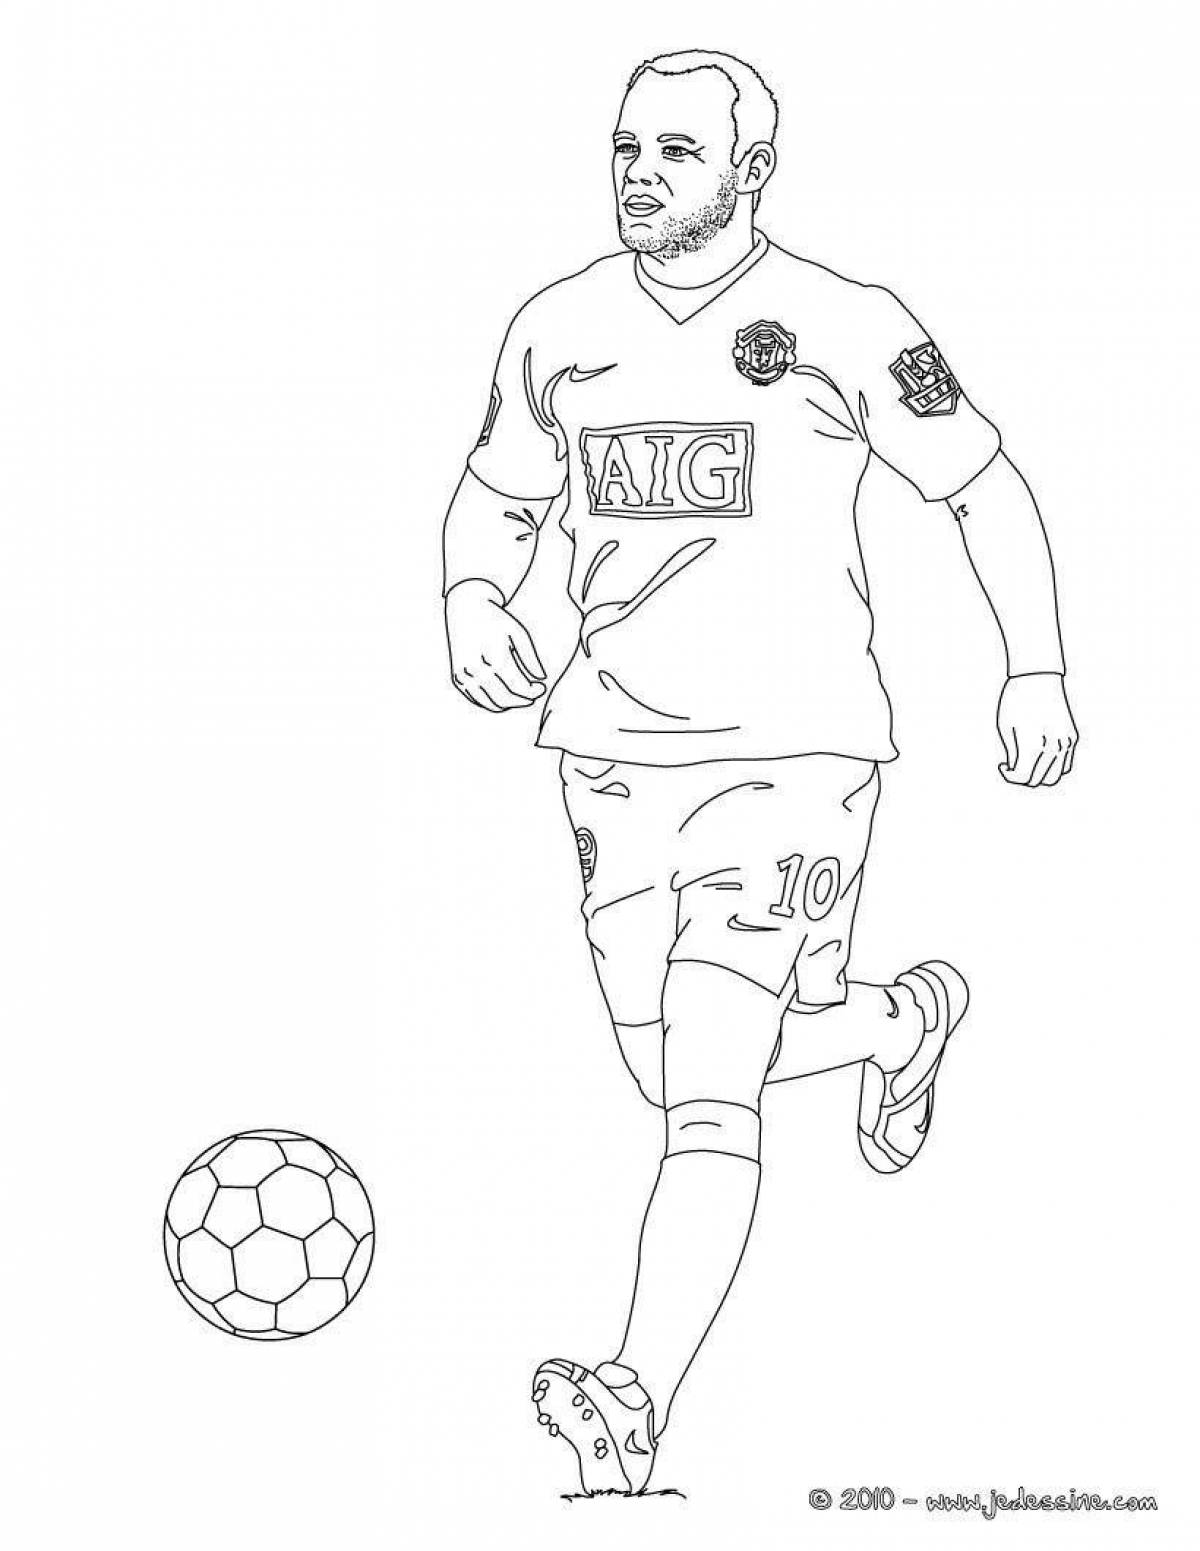 Coloring page brave football players